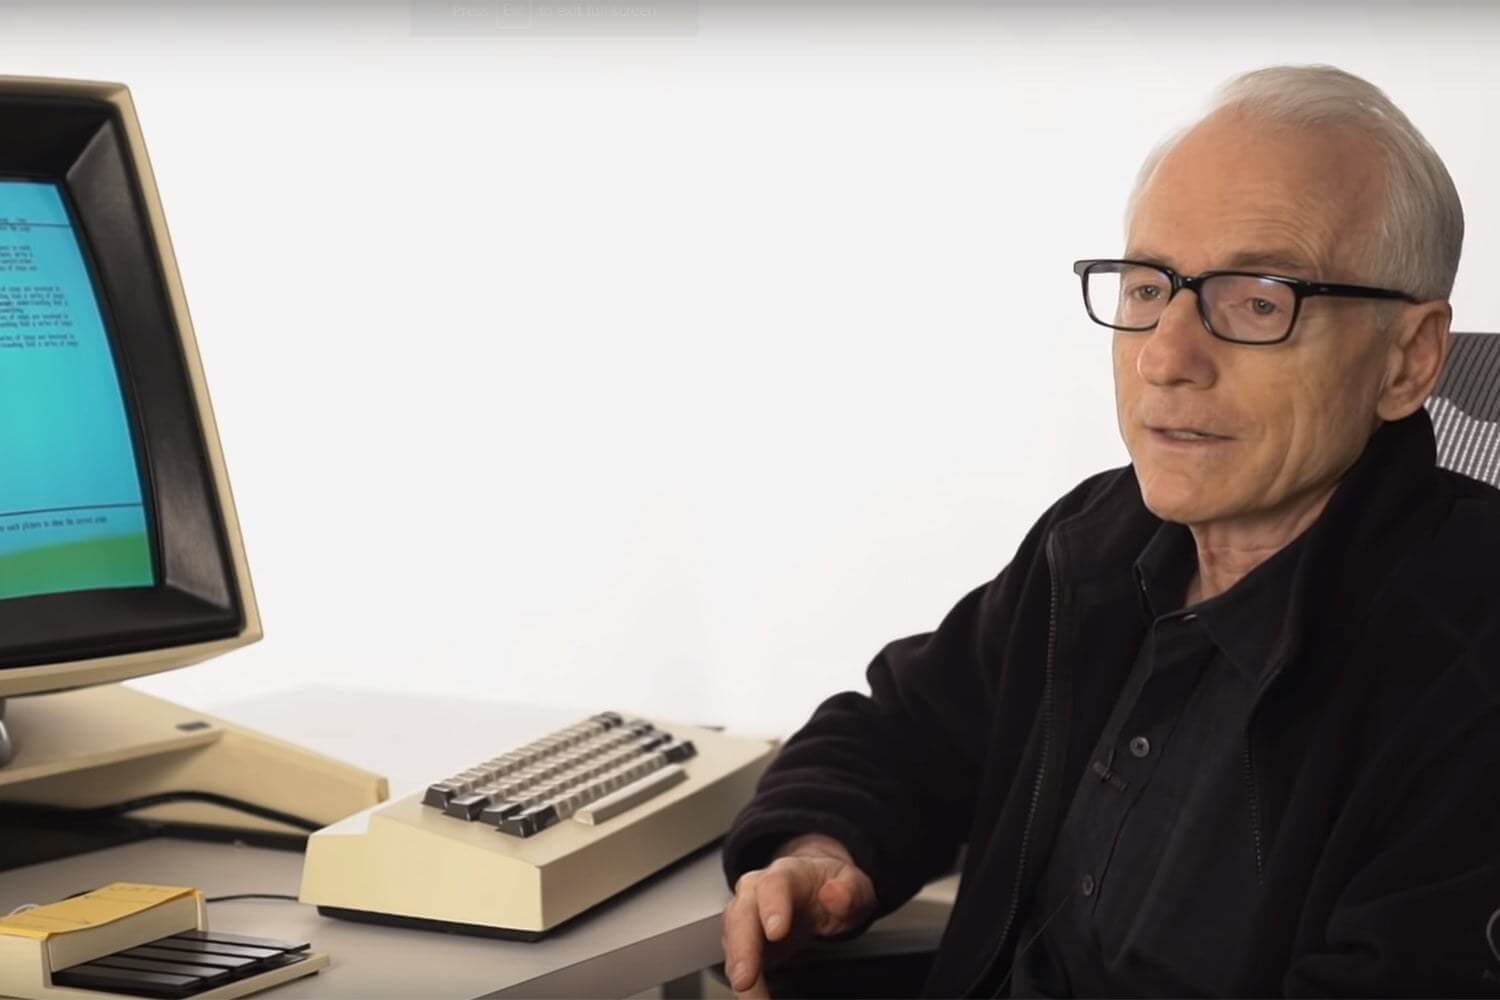 Larry Tesler, creator of cut, copy, and paste, dies at 74